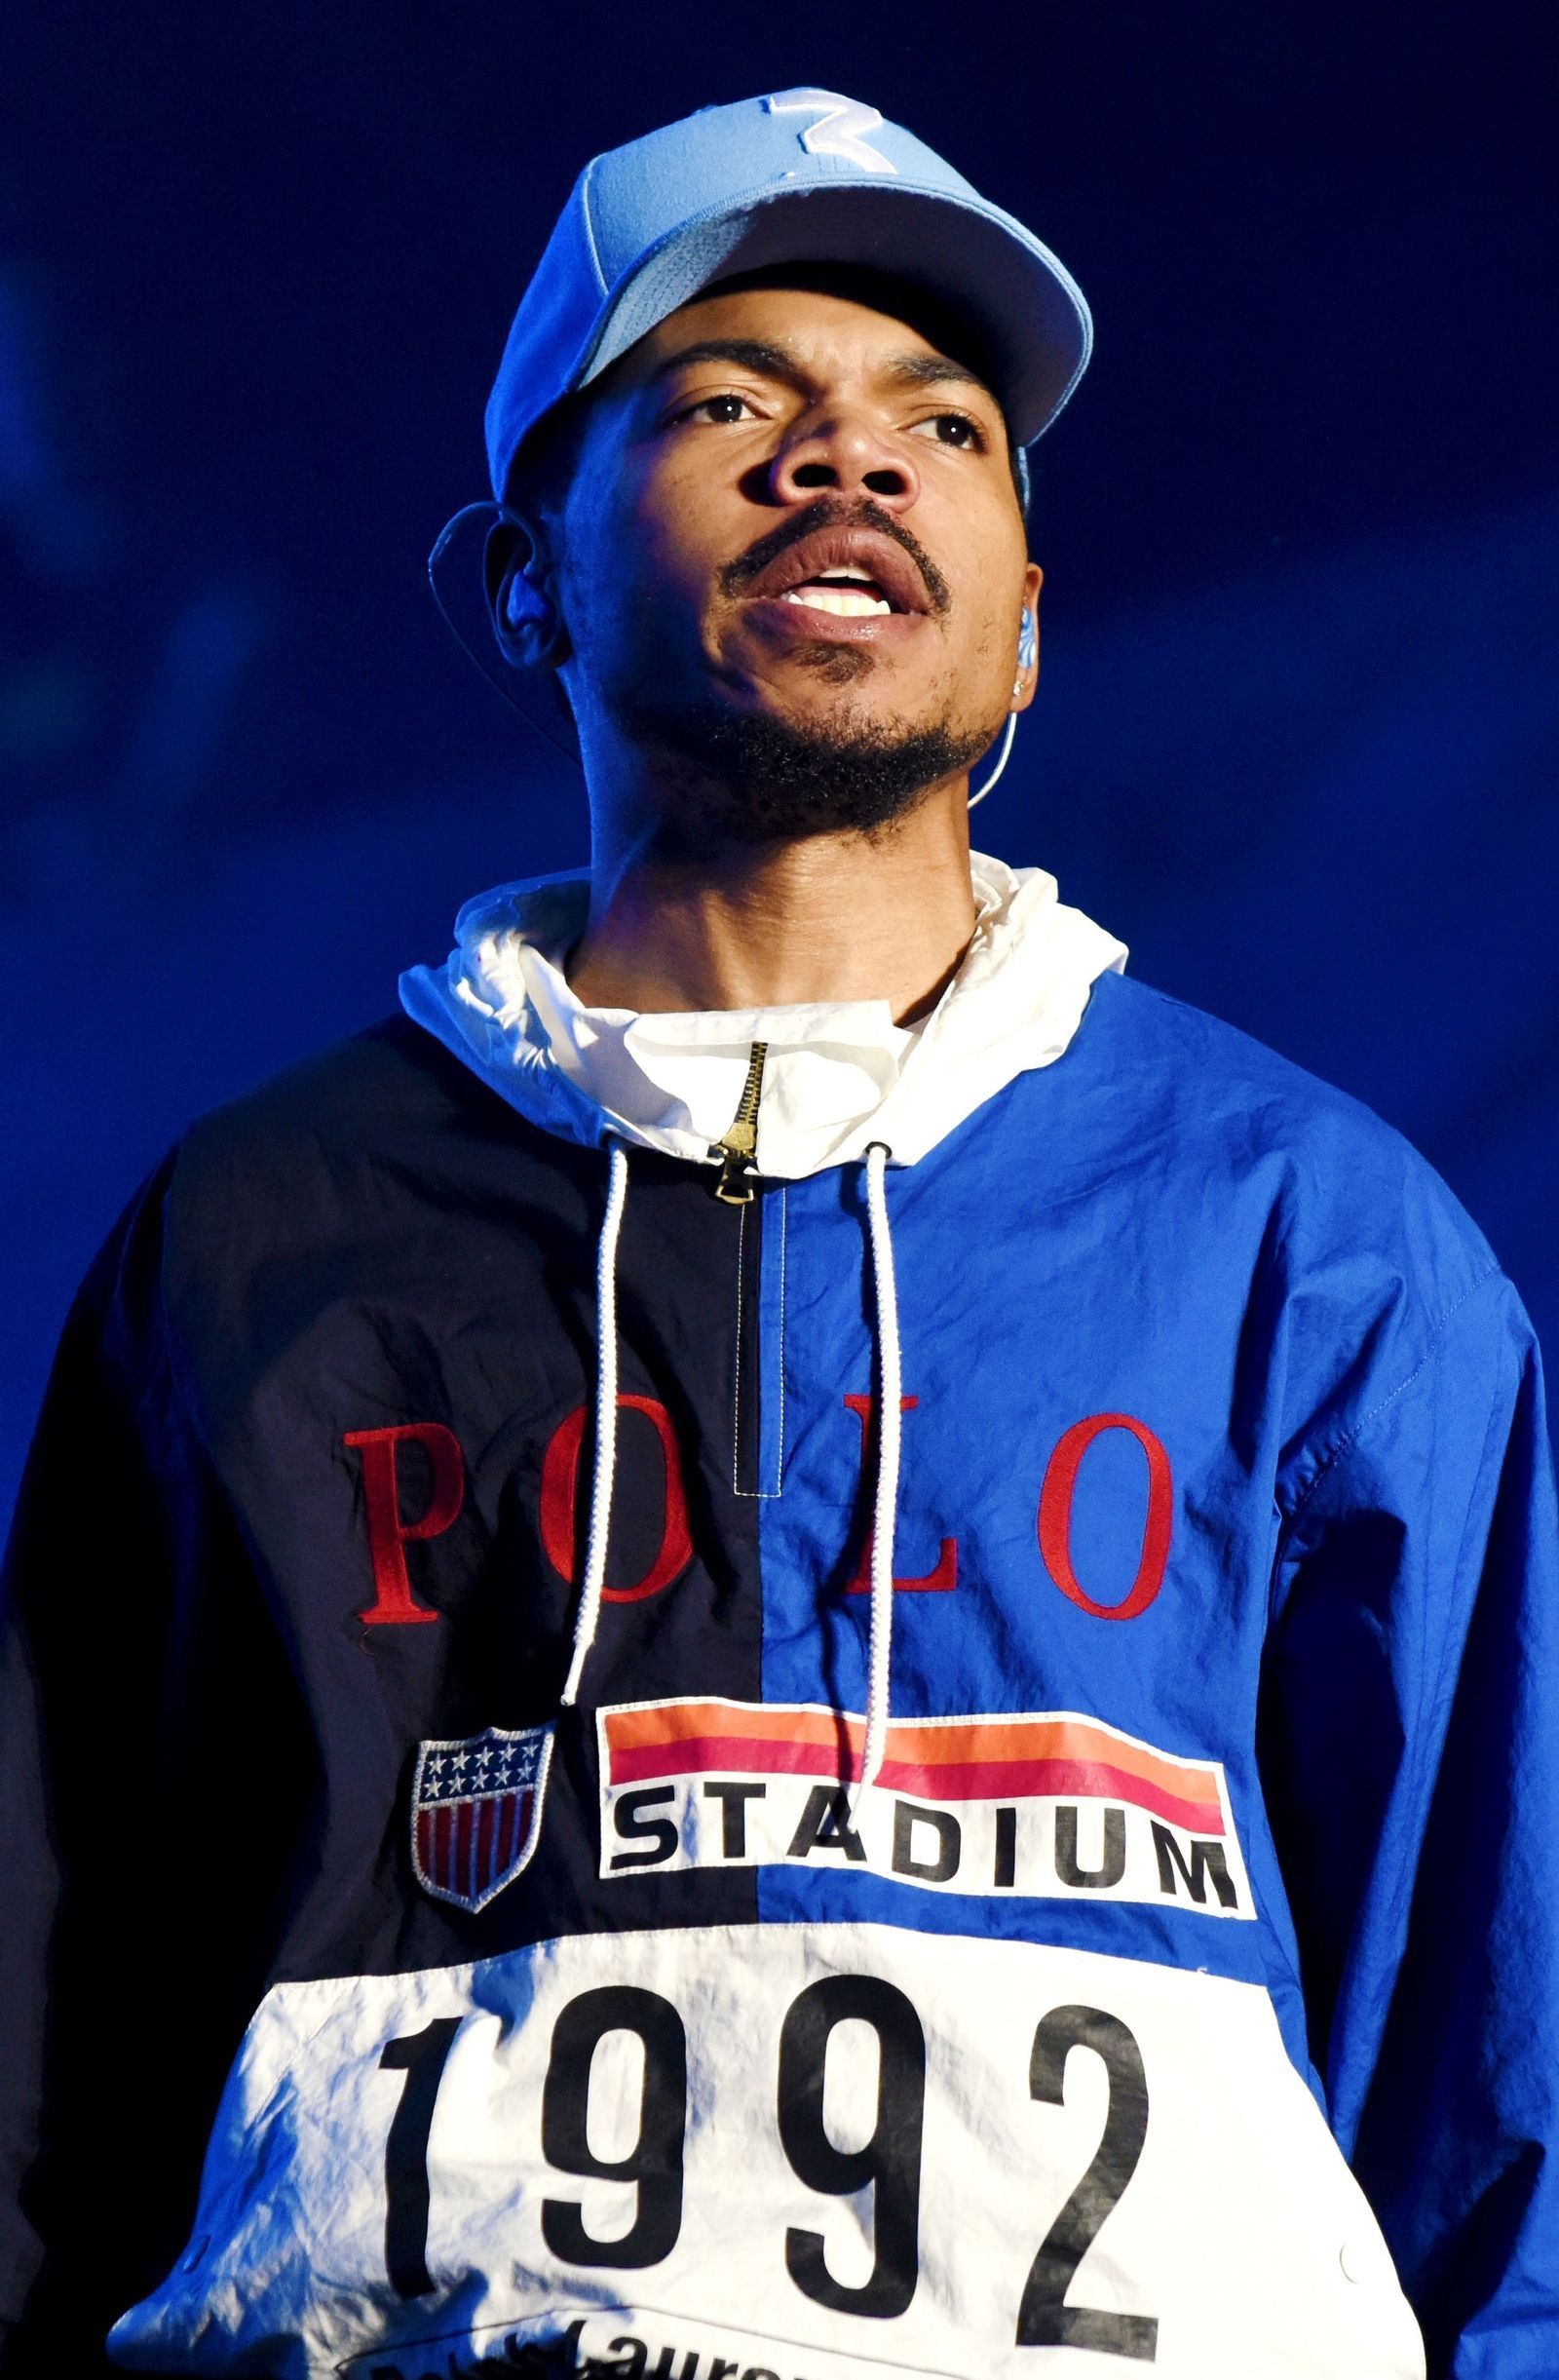 Chance the Rapper in a blue and white hoodie and blue baseball cap - Chance the Rapper